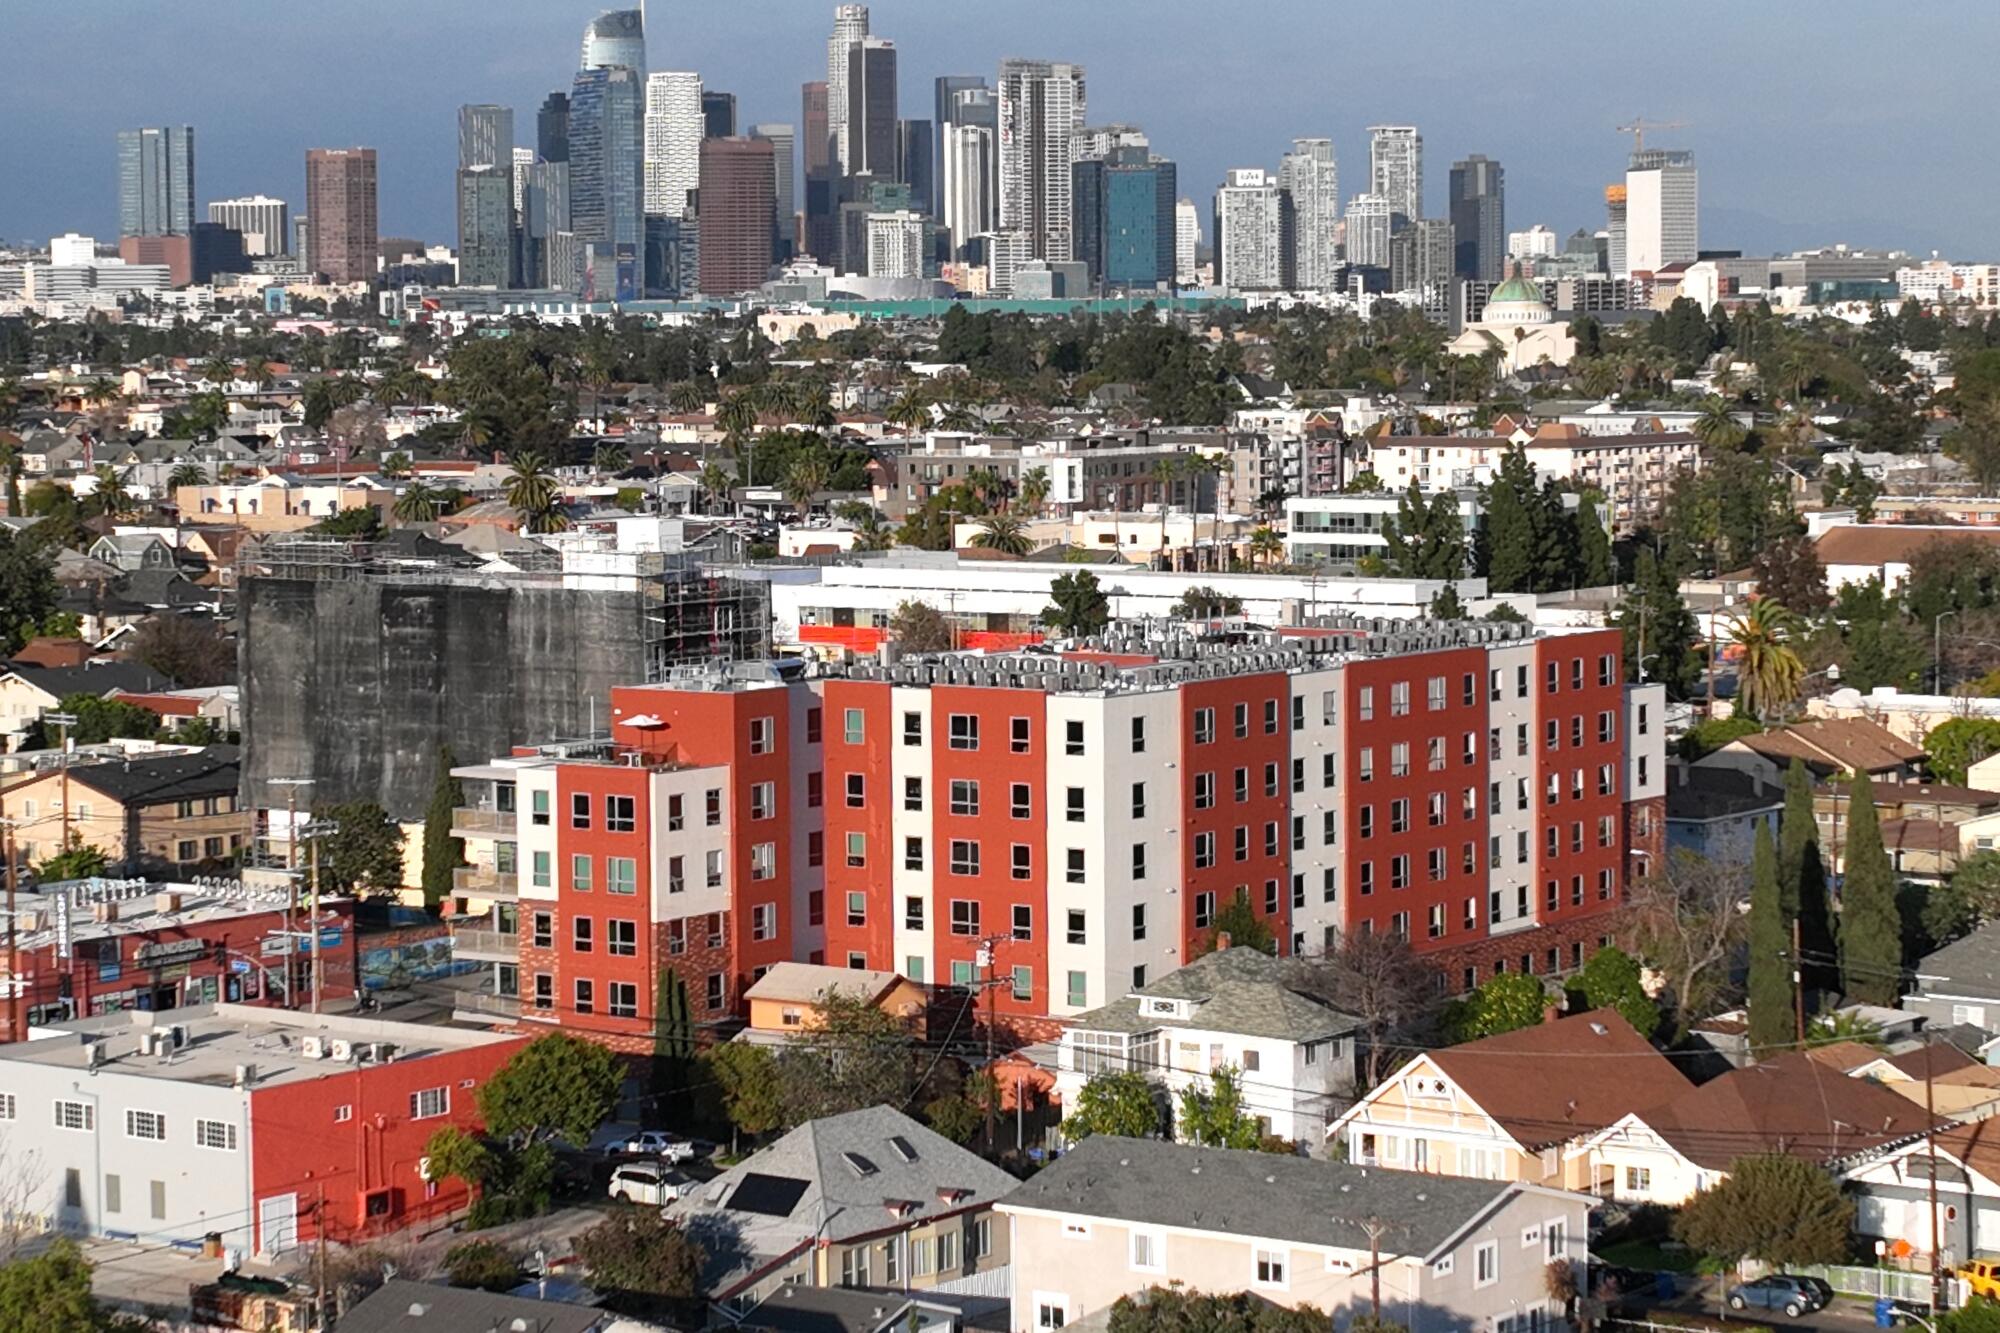 Brightly colored red and white apartments surrounded by homes, with a city skyline in the distance